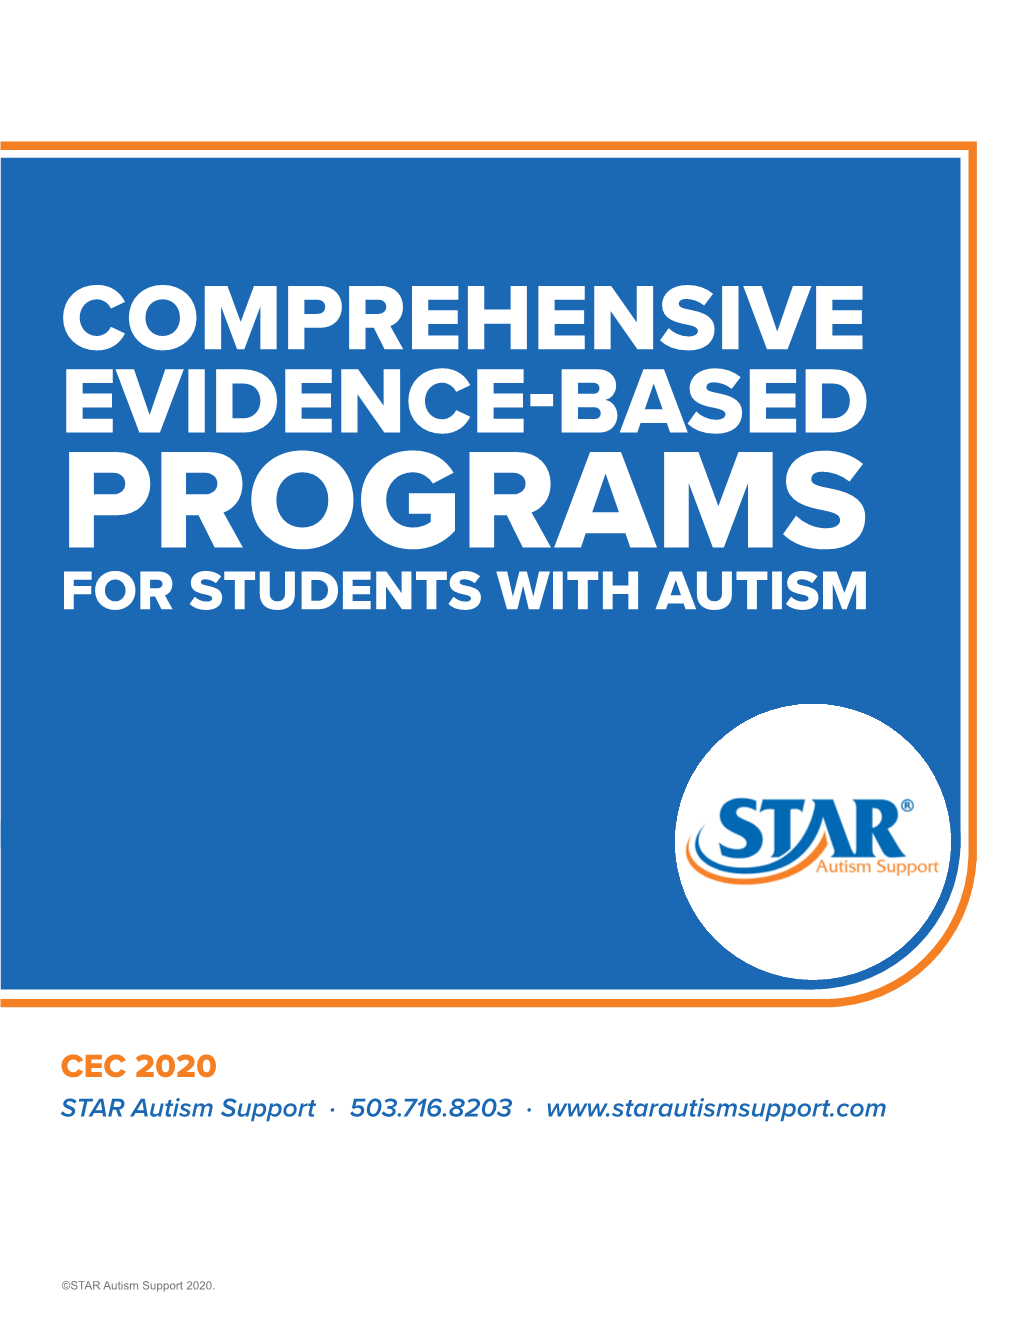 Comprehensive Evidence-Based Programs for Students with Autism